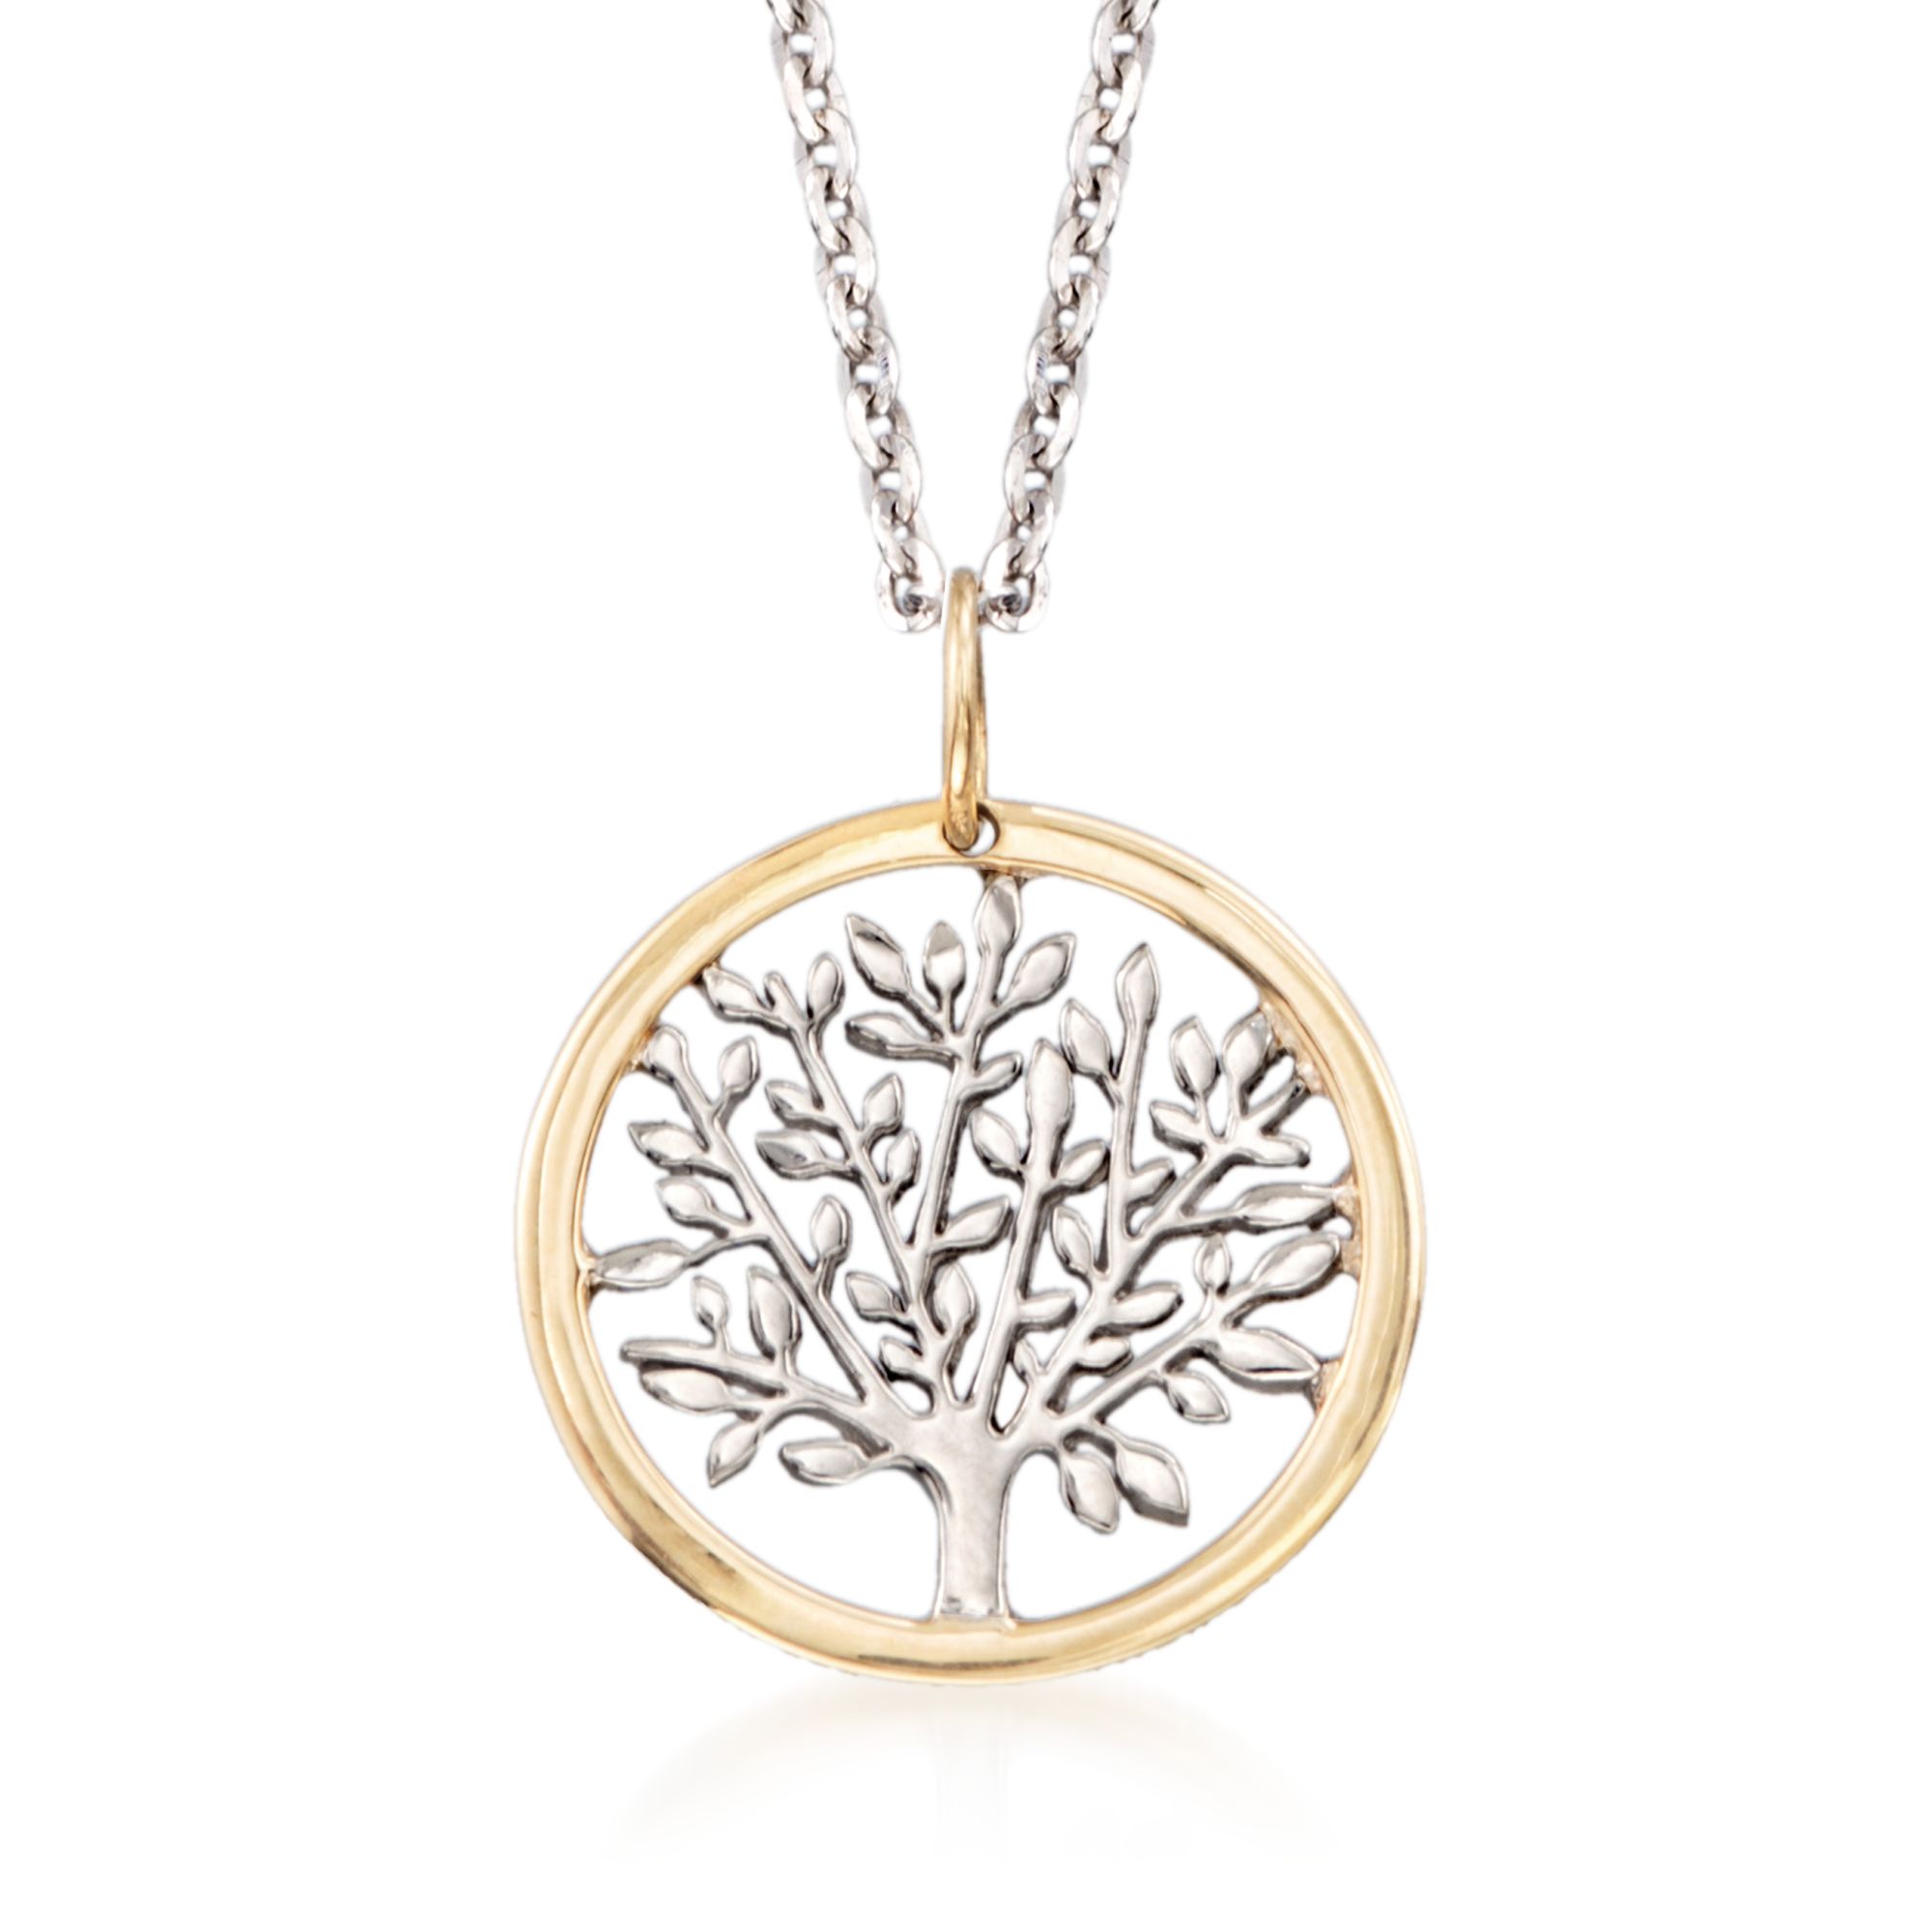 Yellow Flower Tree of Life and Dragon Claw Antique Pendant Silver Necklace